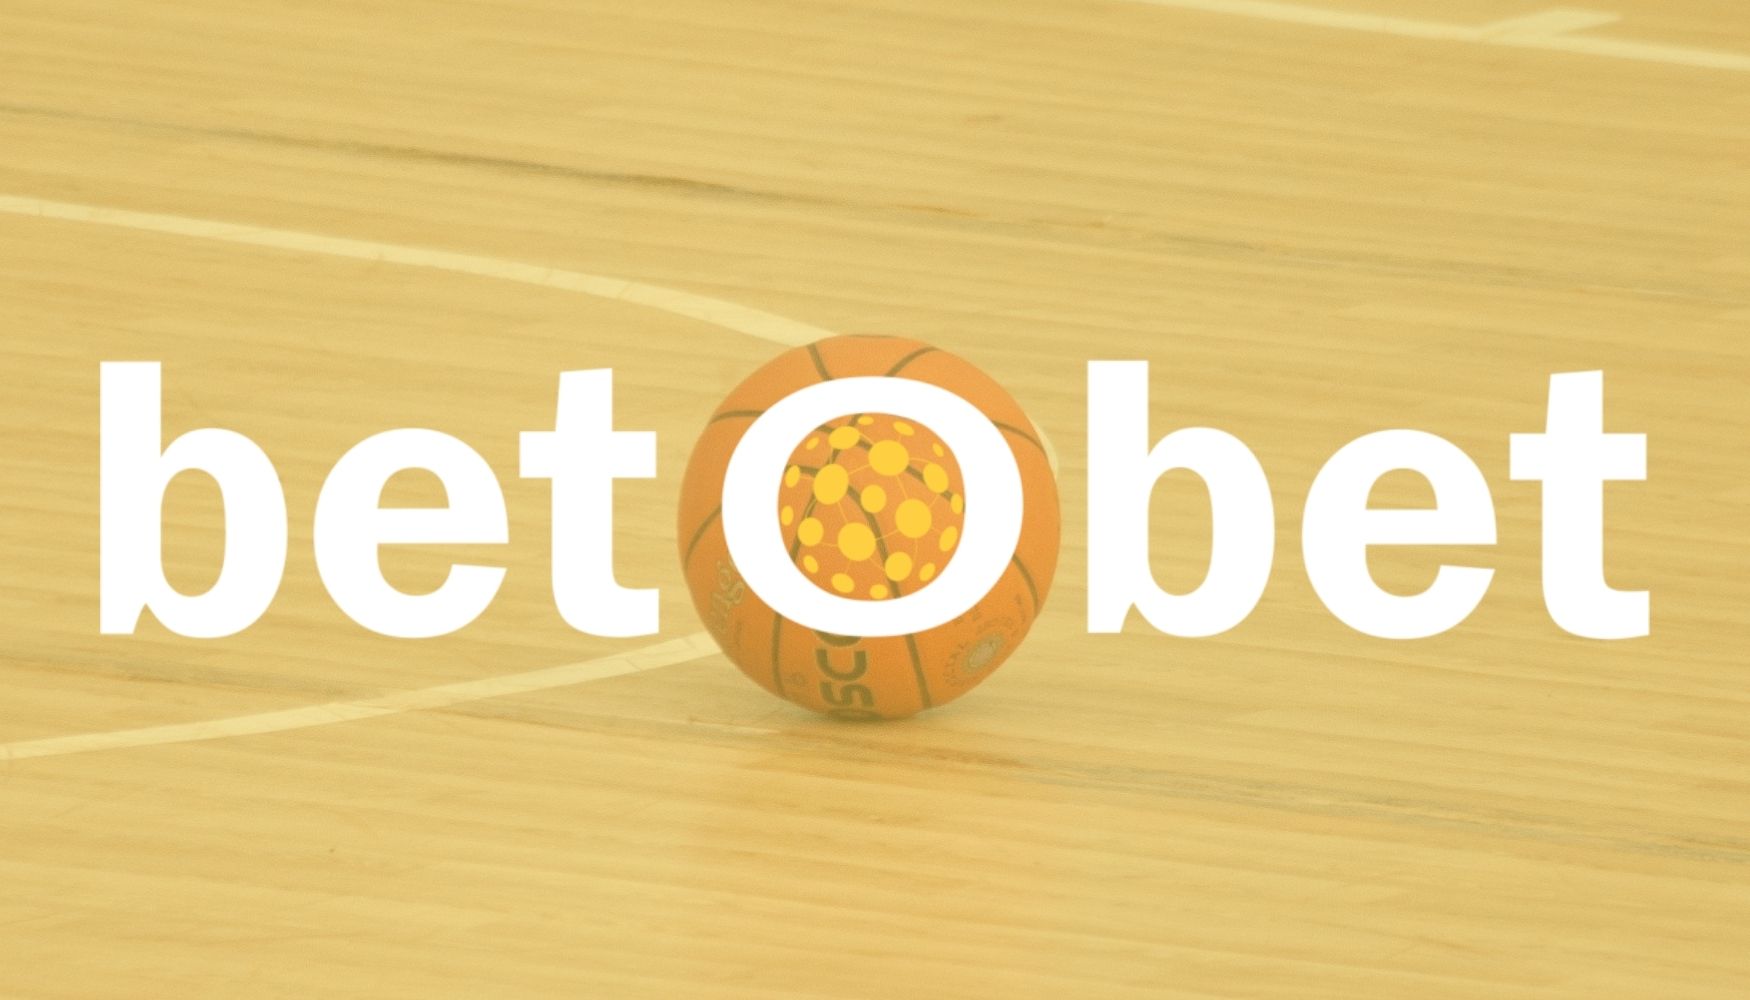 Betobet official sports betting website overview